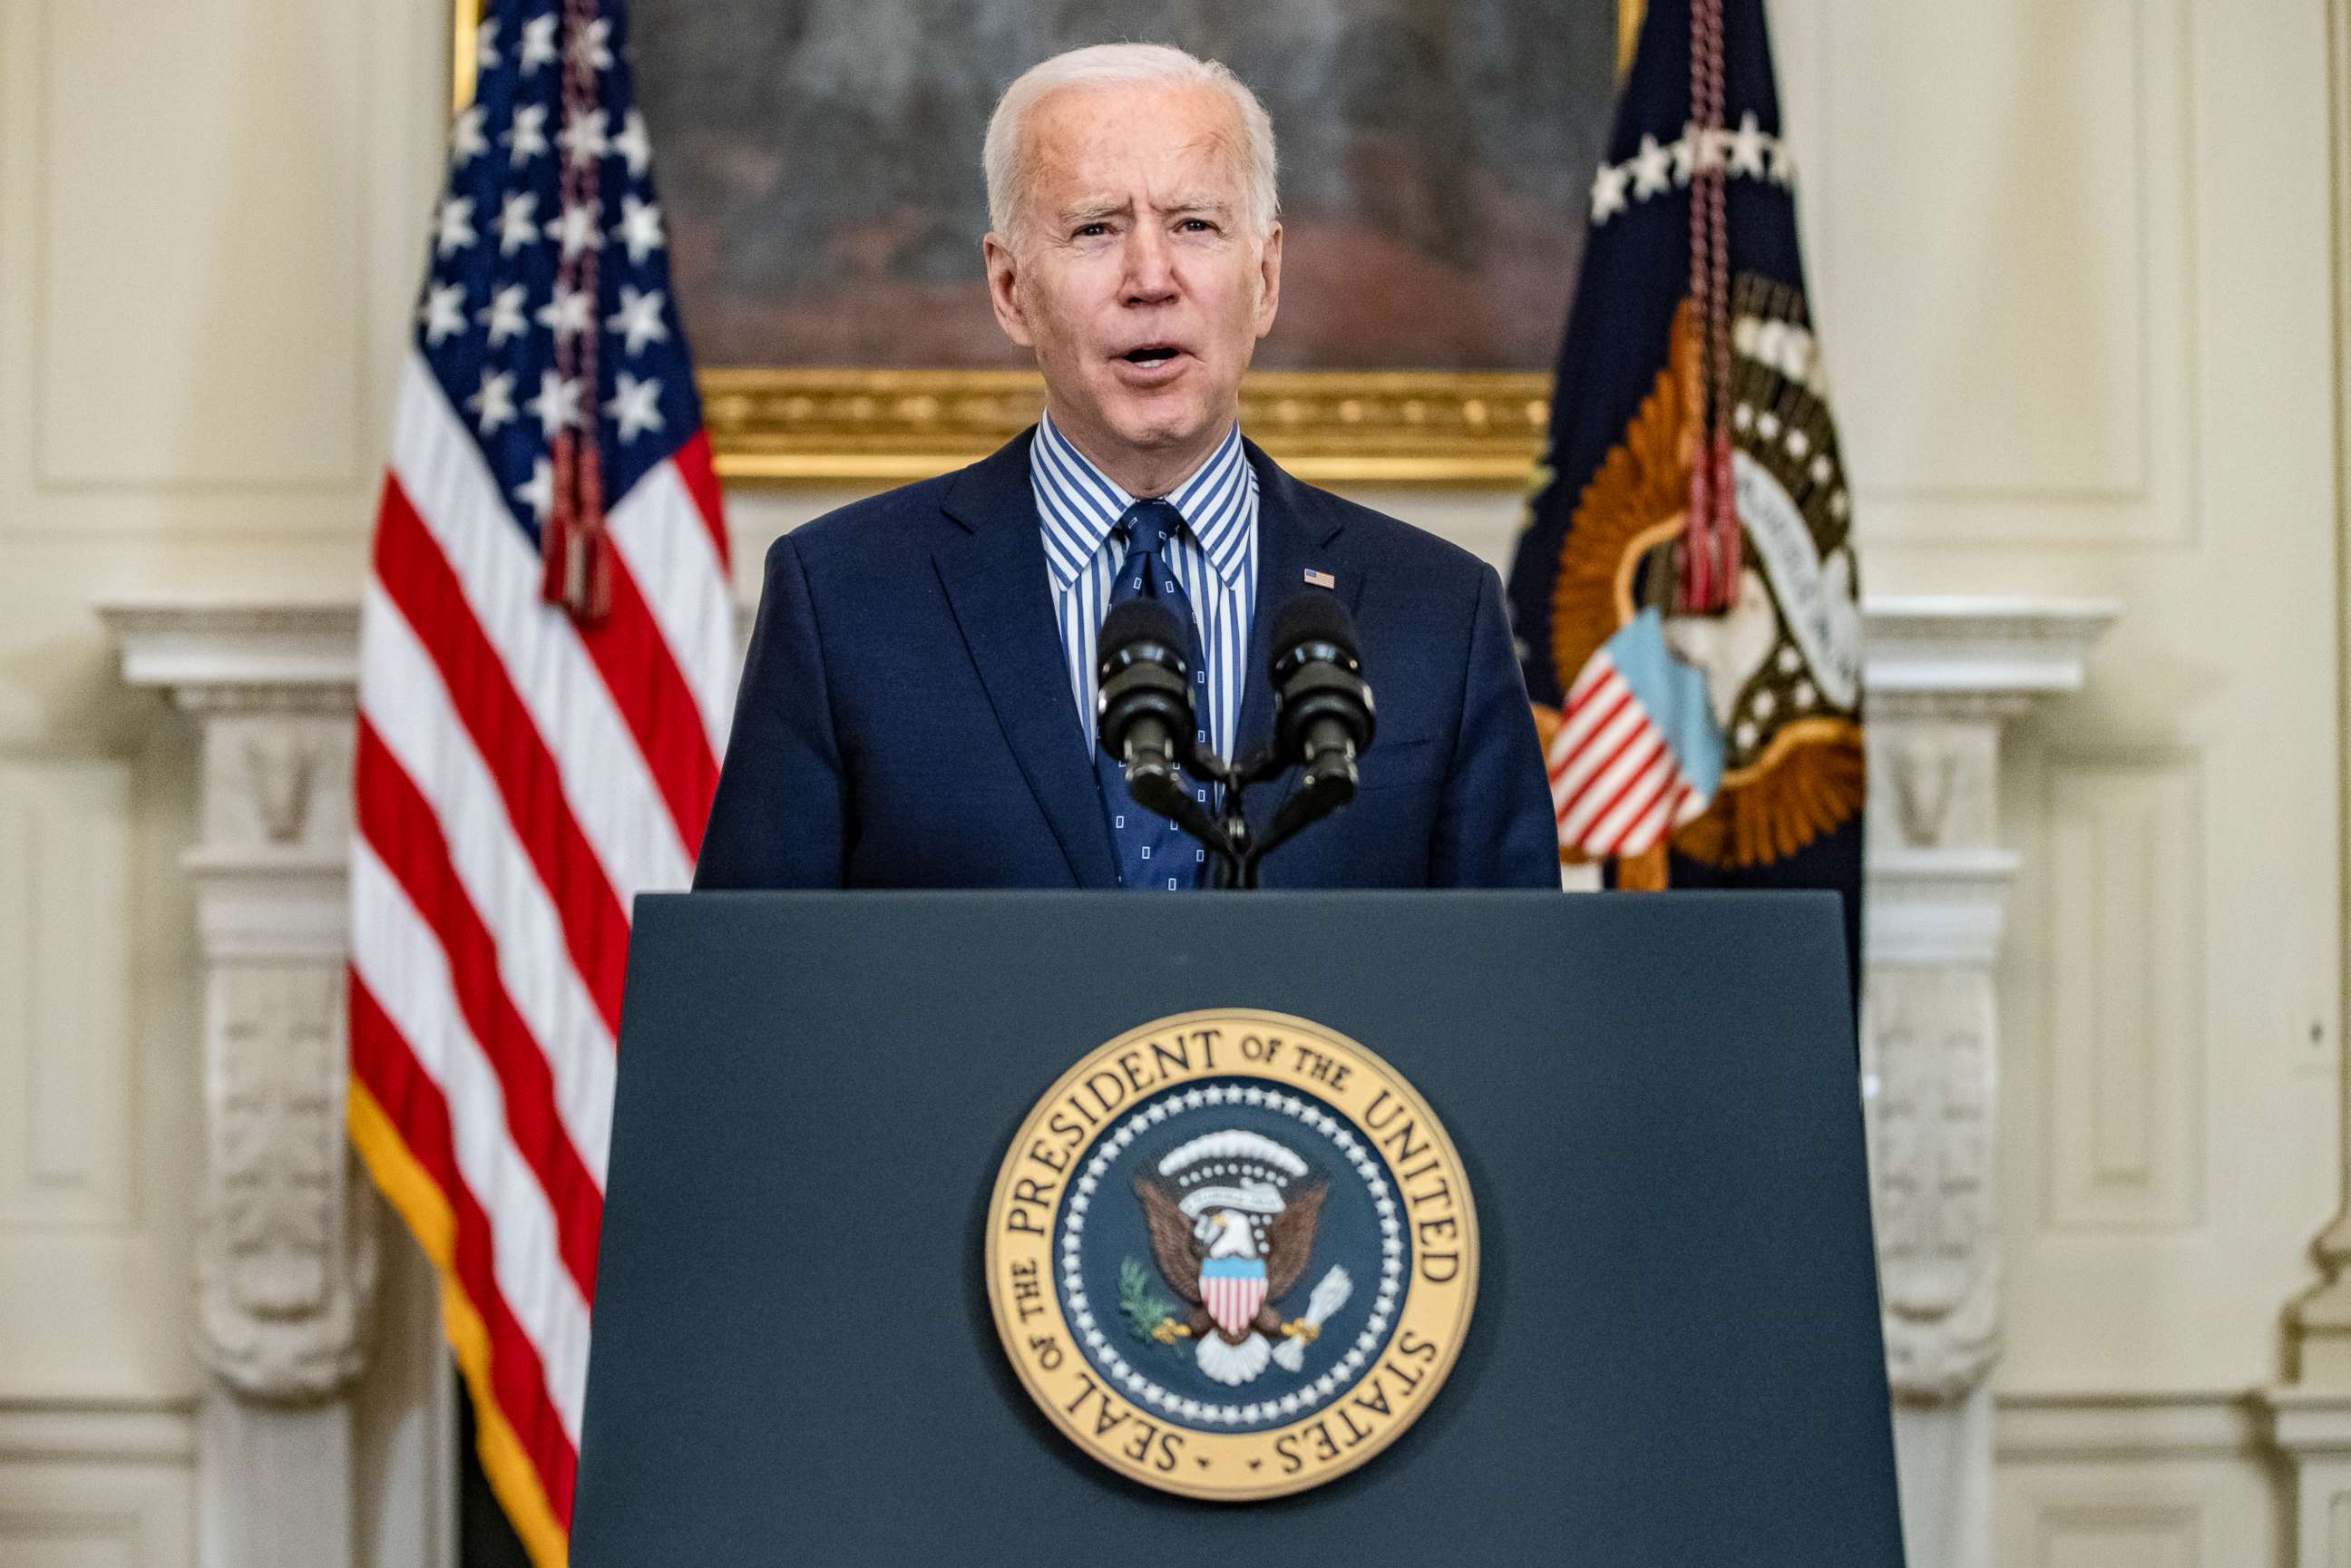 PHOTO: President Joe Biden speaks from the State Dining Room following the passage of the American Rescue Plan in the U.S. Senate at the White House on March 6, 2021 in Washington, D.C. 